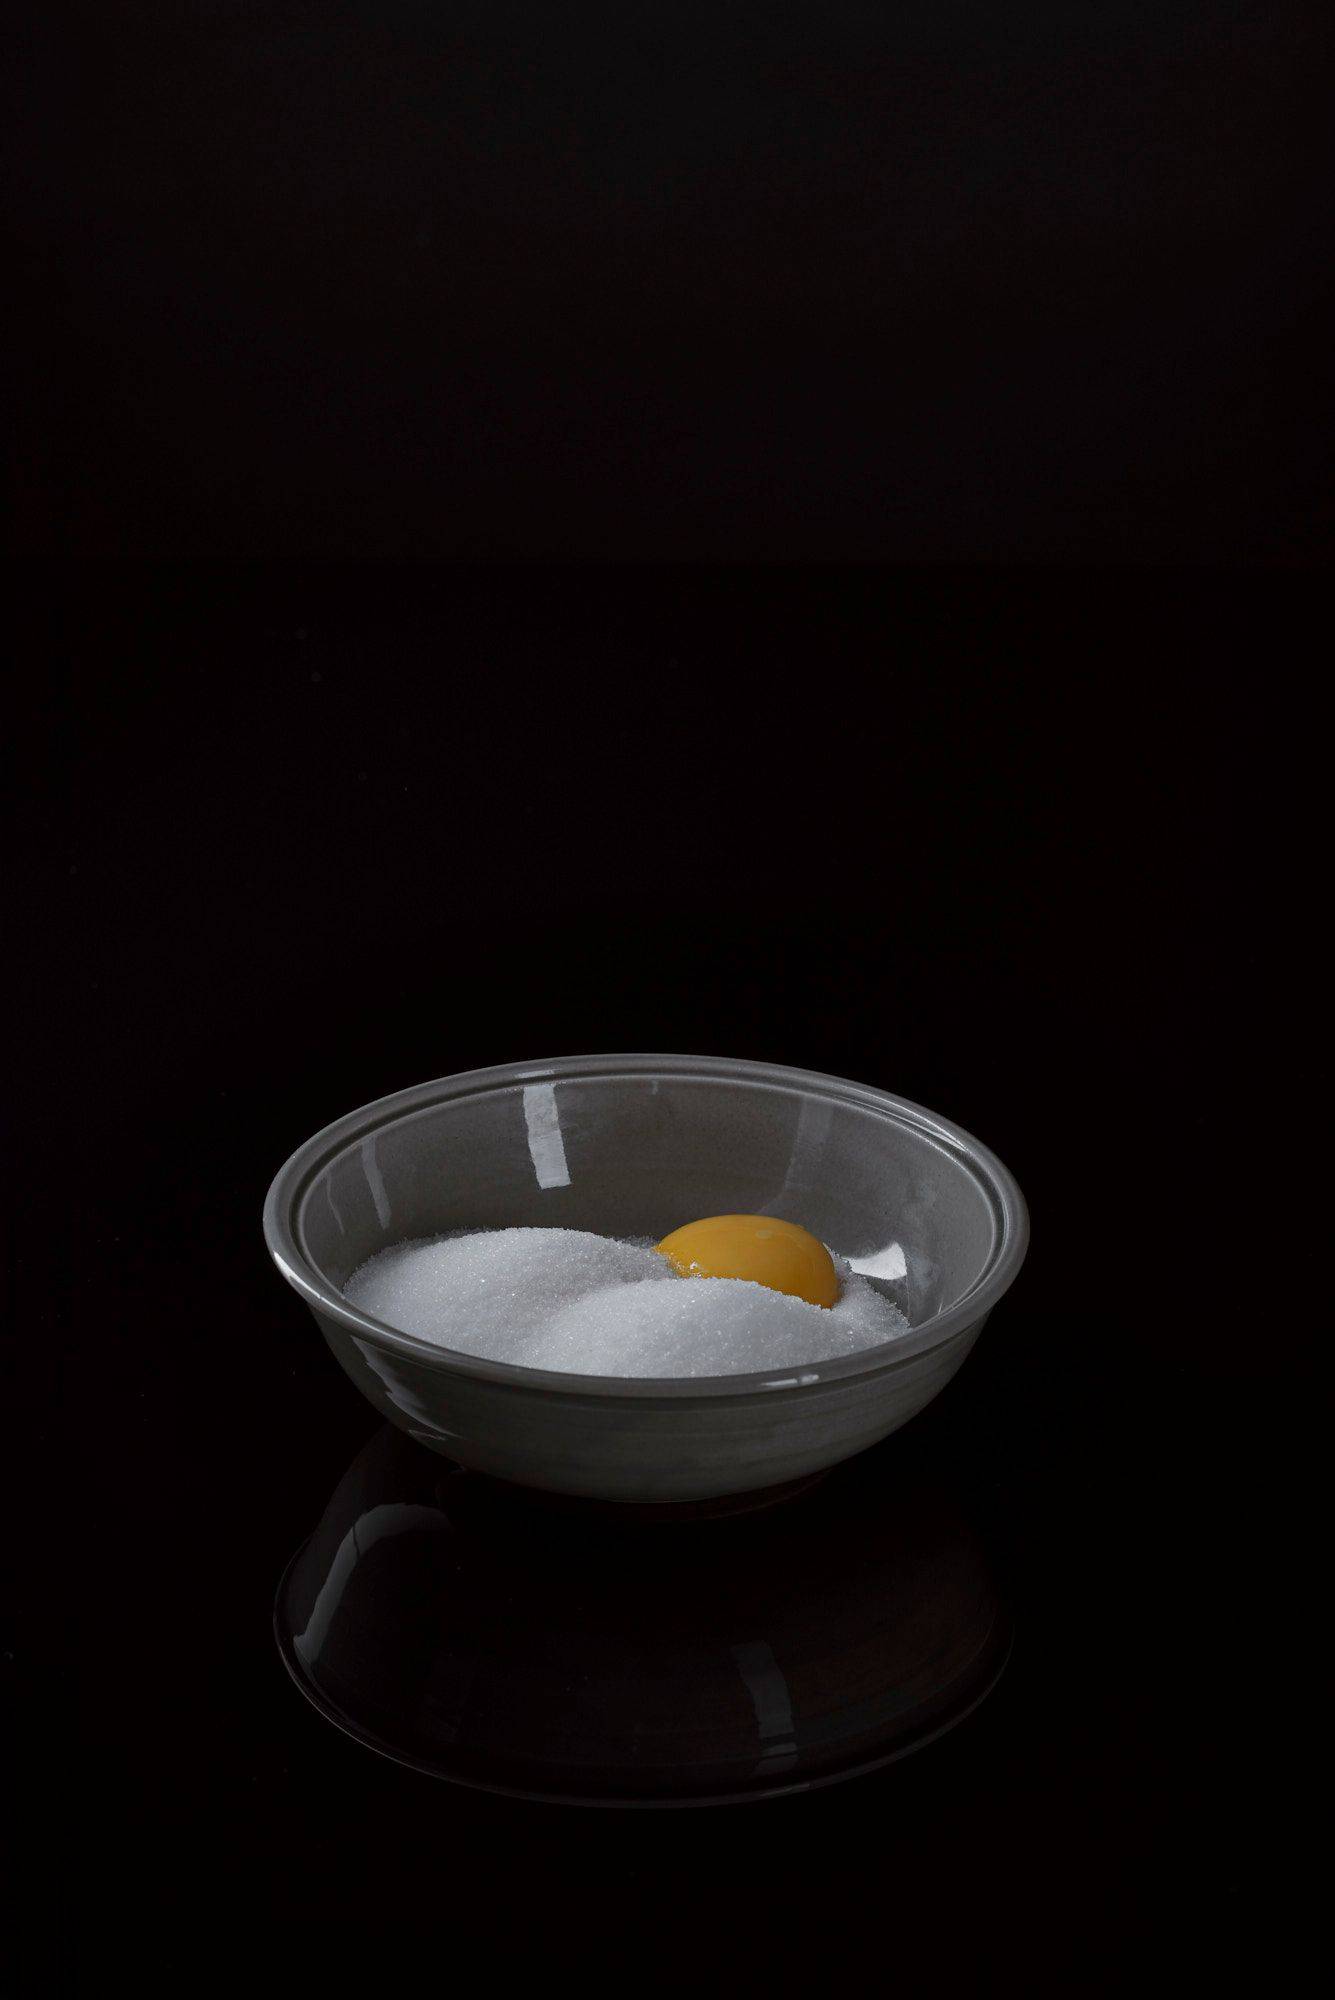 curing egg yolks with black background